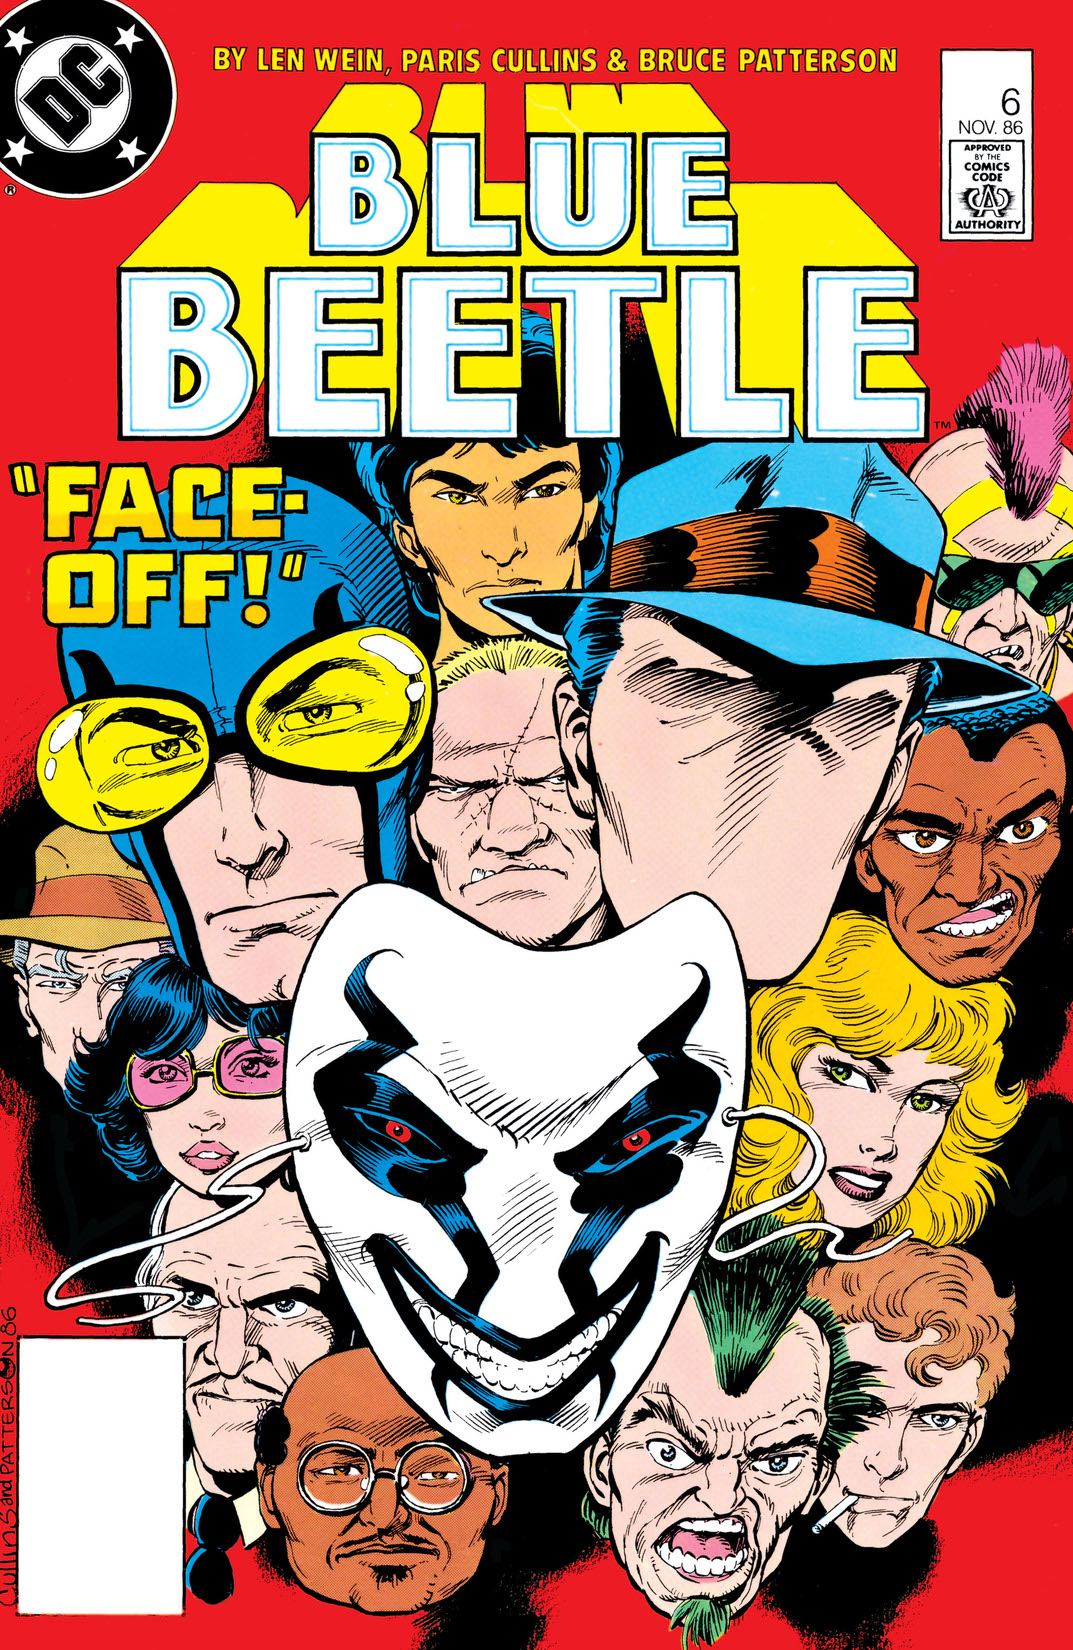 Blue Beetle (1986-) #6 preview images